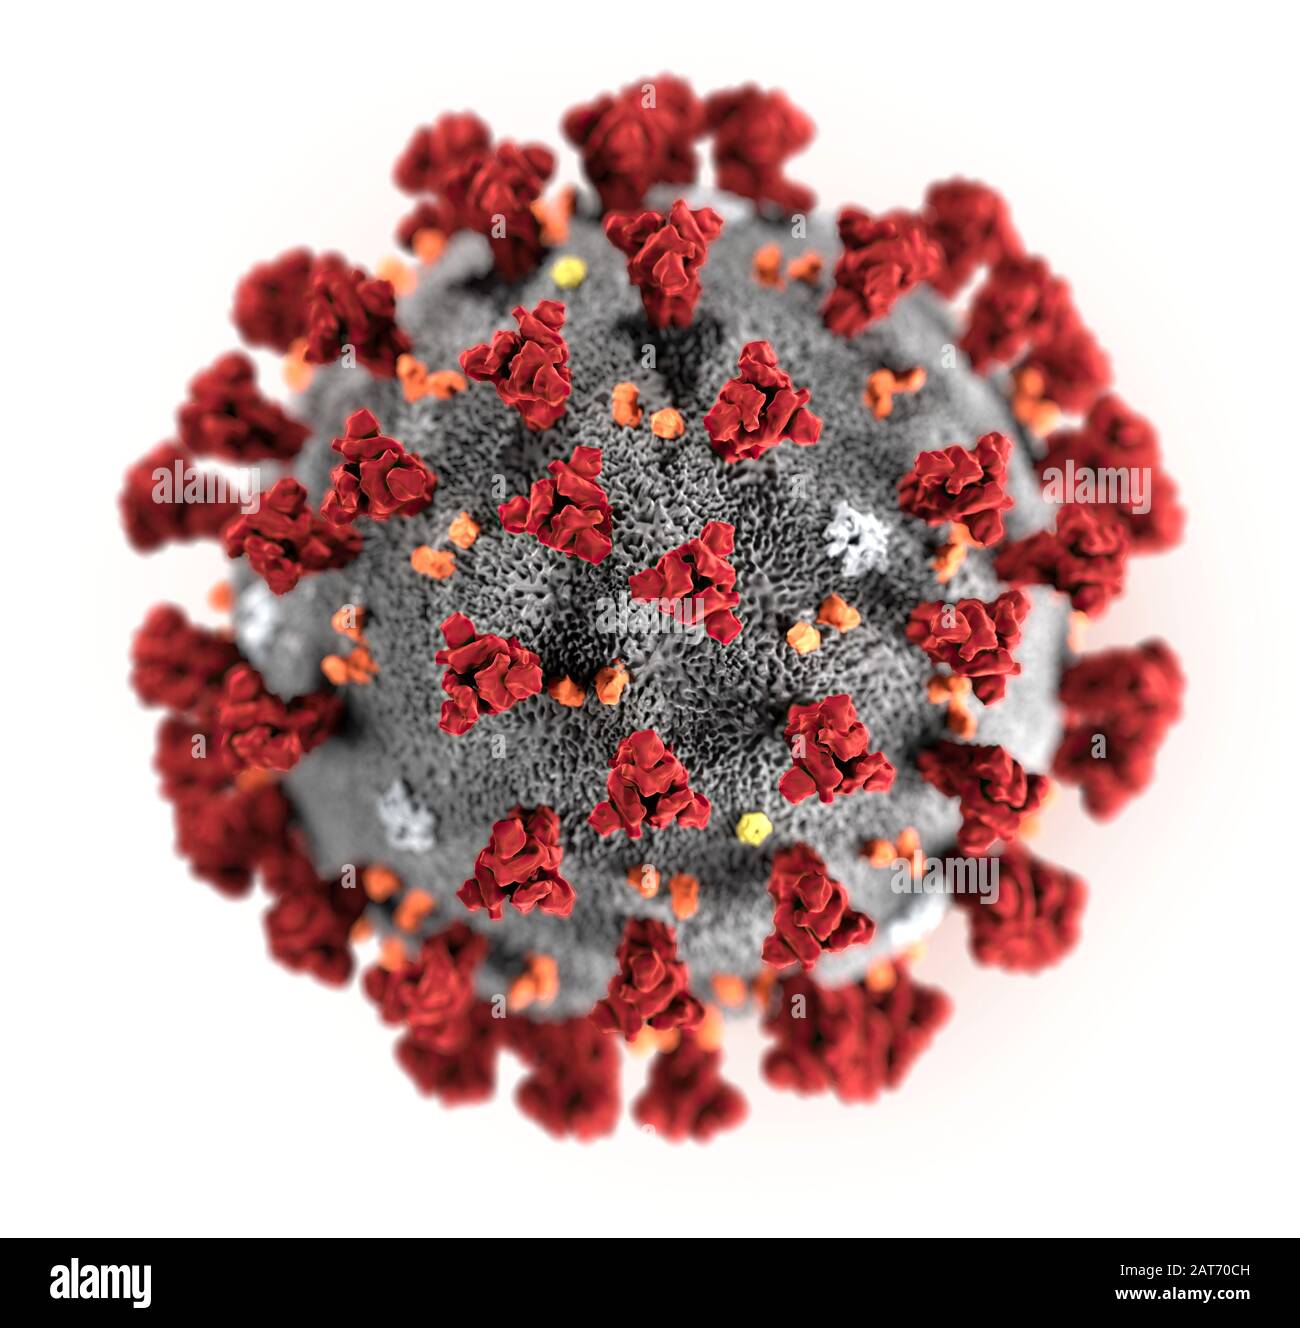 This illustration, created at the Centers for Disease Control and Prevention (CDC), reveals ultrastructural morphology exhibited by the 2019 Novel Coronavirus (COVID-19). Note the spikes that adorn the outer surface of the virus, which impart the look of a corona surrounding the virion, when viewed electron microscopically. In this view, the protein particles E, S, M, and HE, also located on the outer surface of the particle, have all been labeled as well. This virus was identified as the cause of an outbreak of respiratory illness first detected in Wuhan, China. Stock Photo